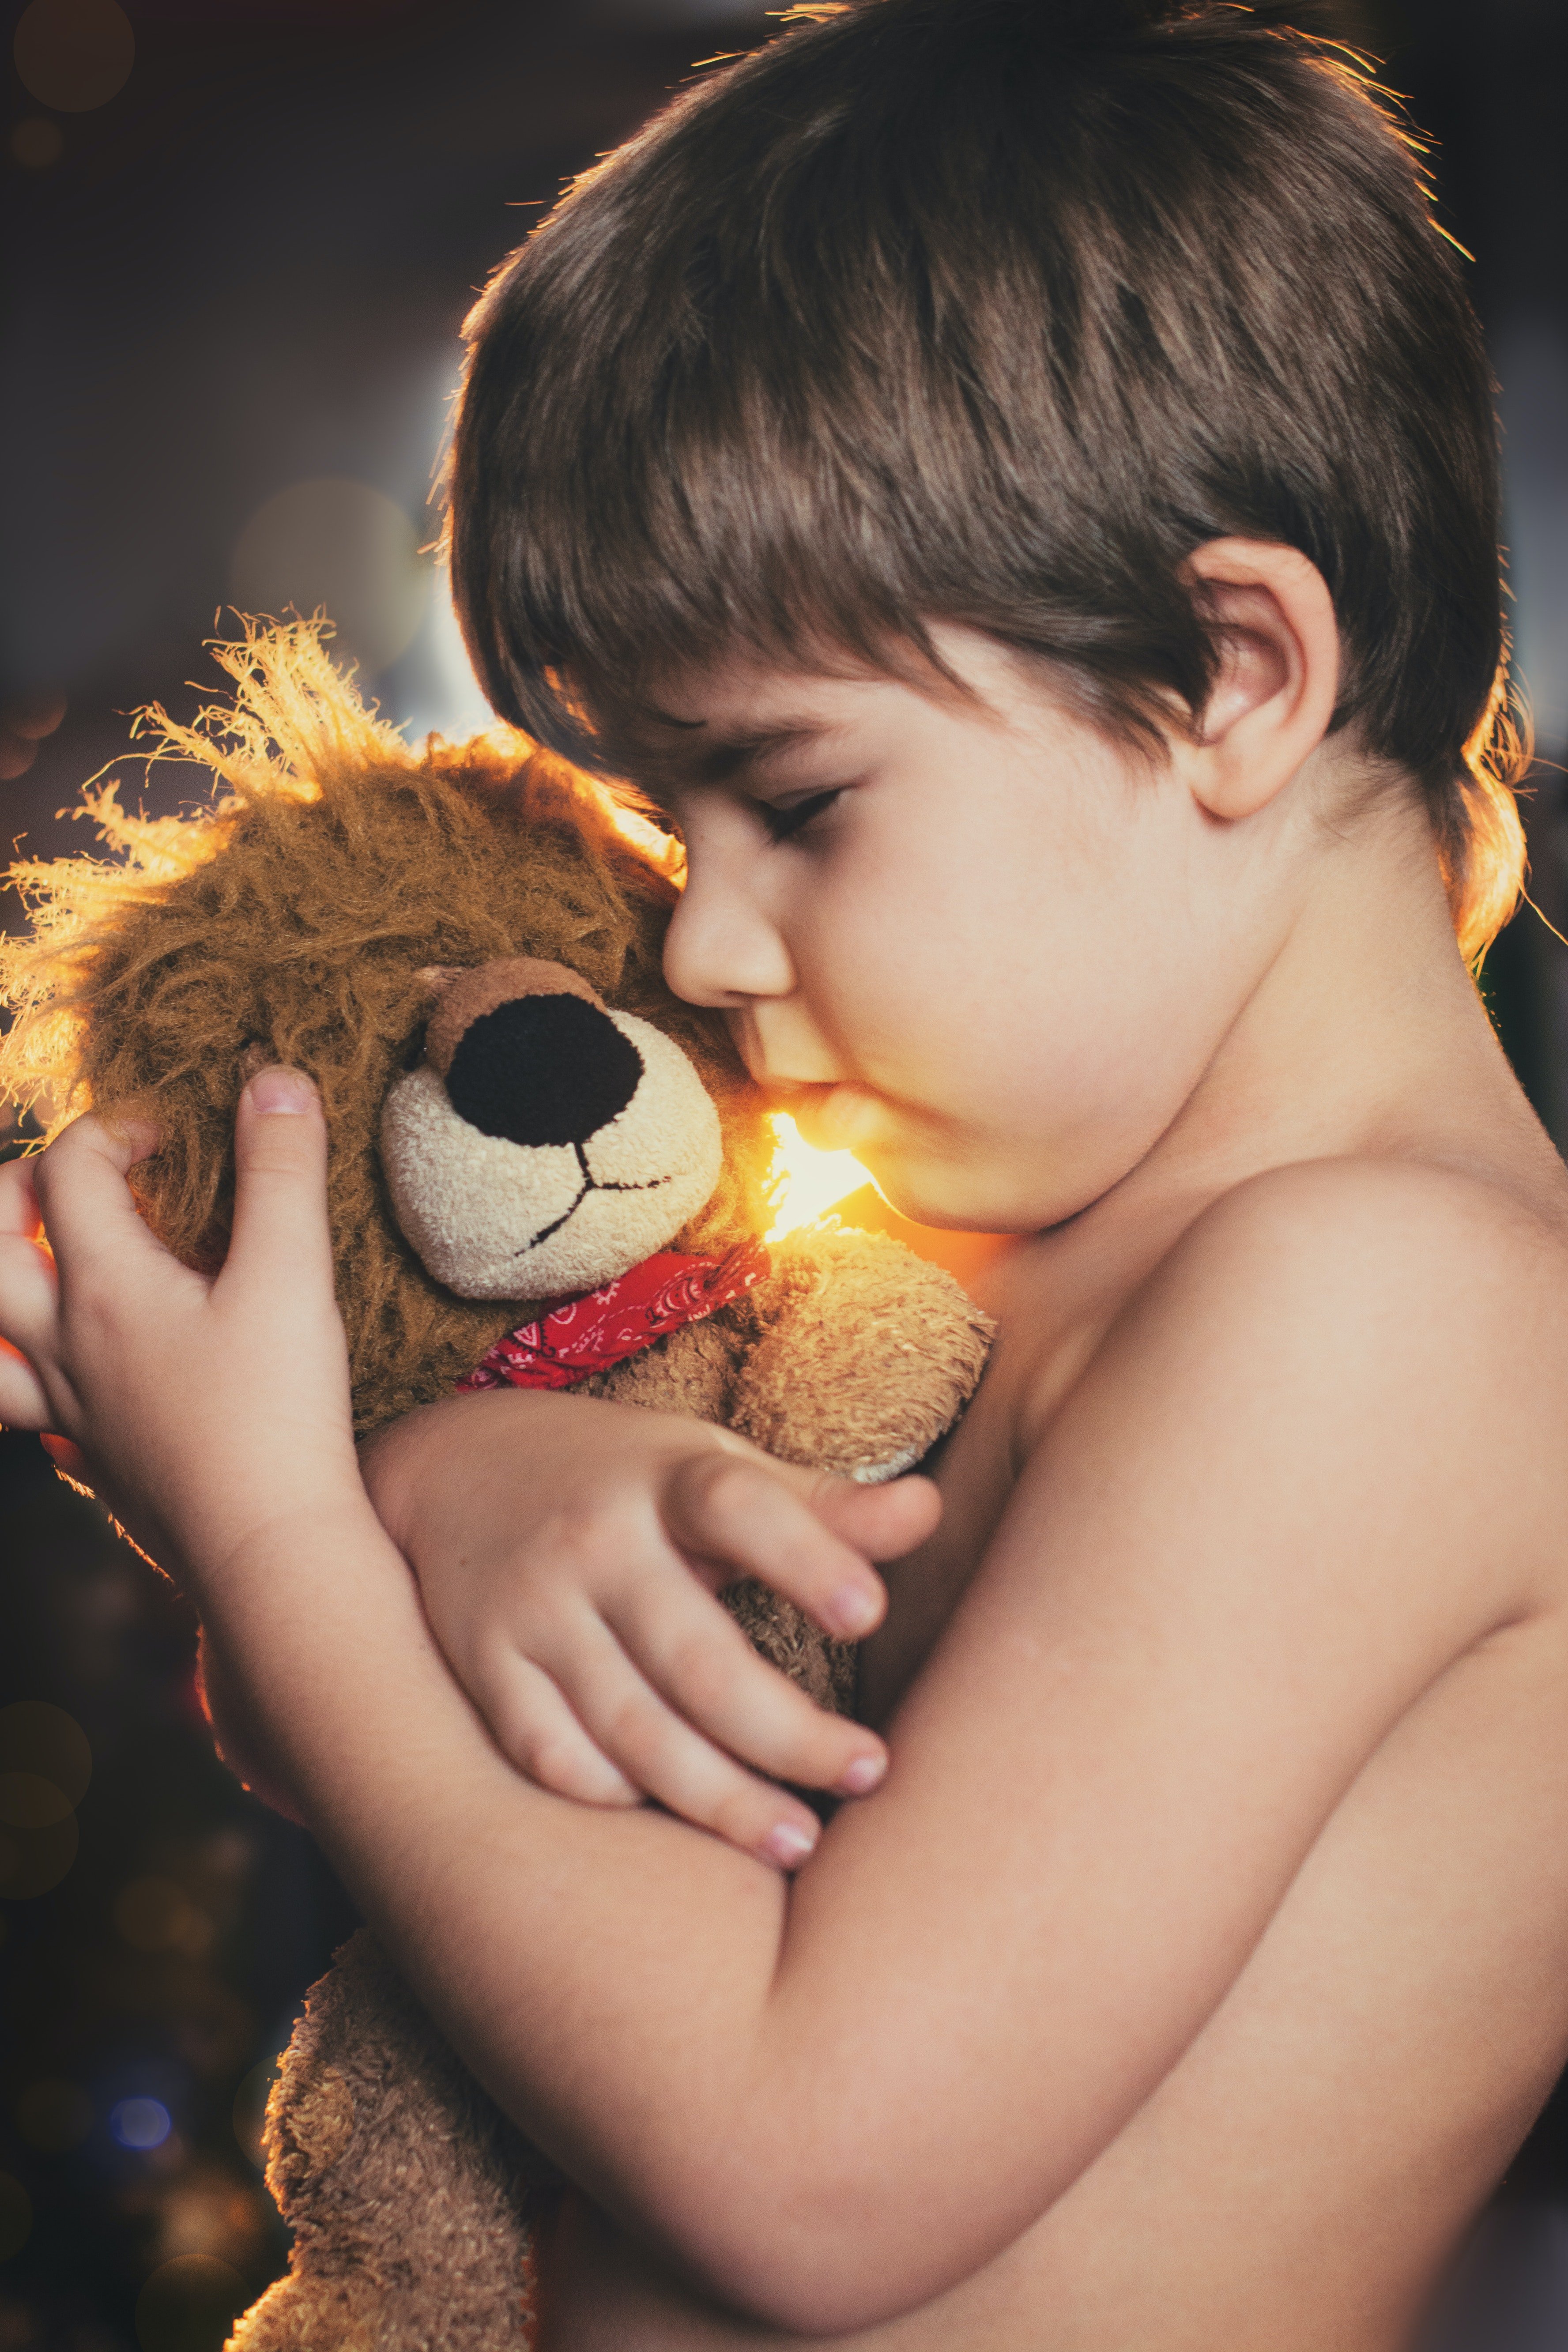 The little boy had with him a stuffed toy that kept his mother's picture. | Source: Pexels